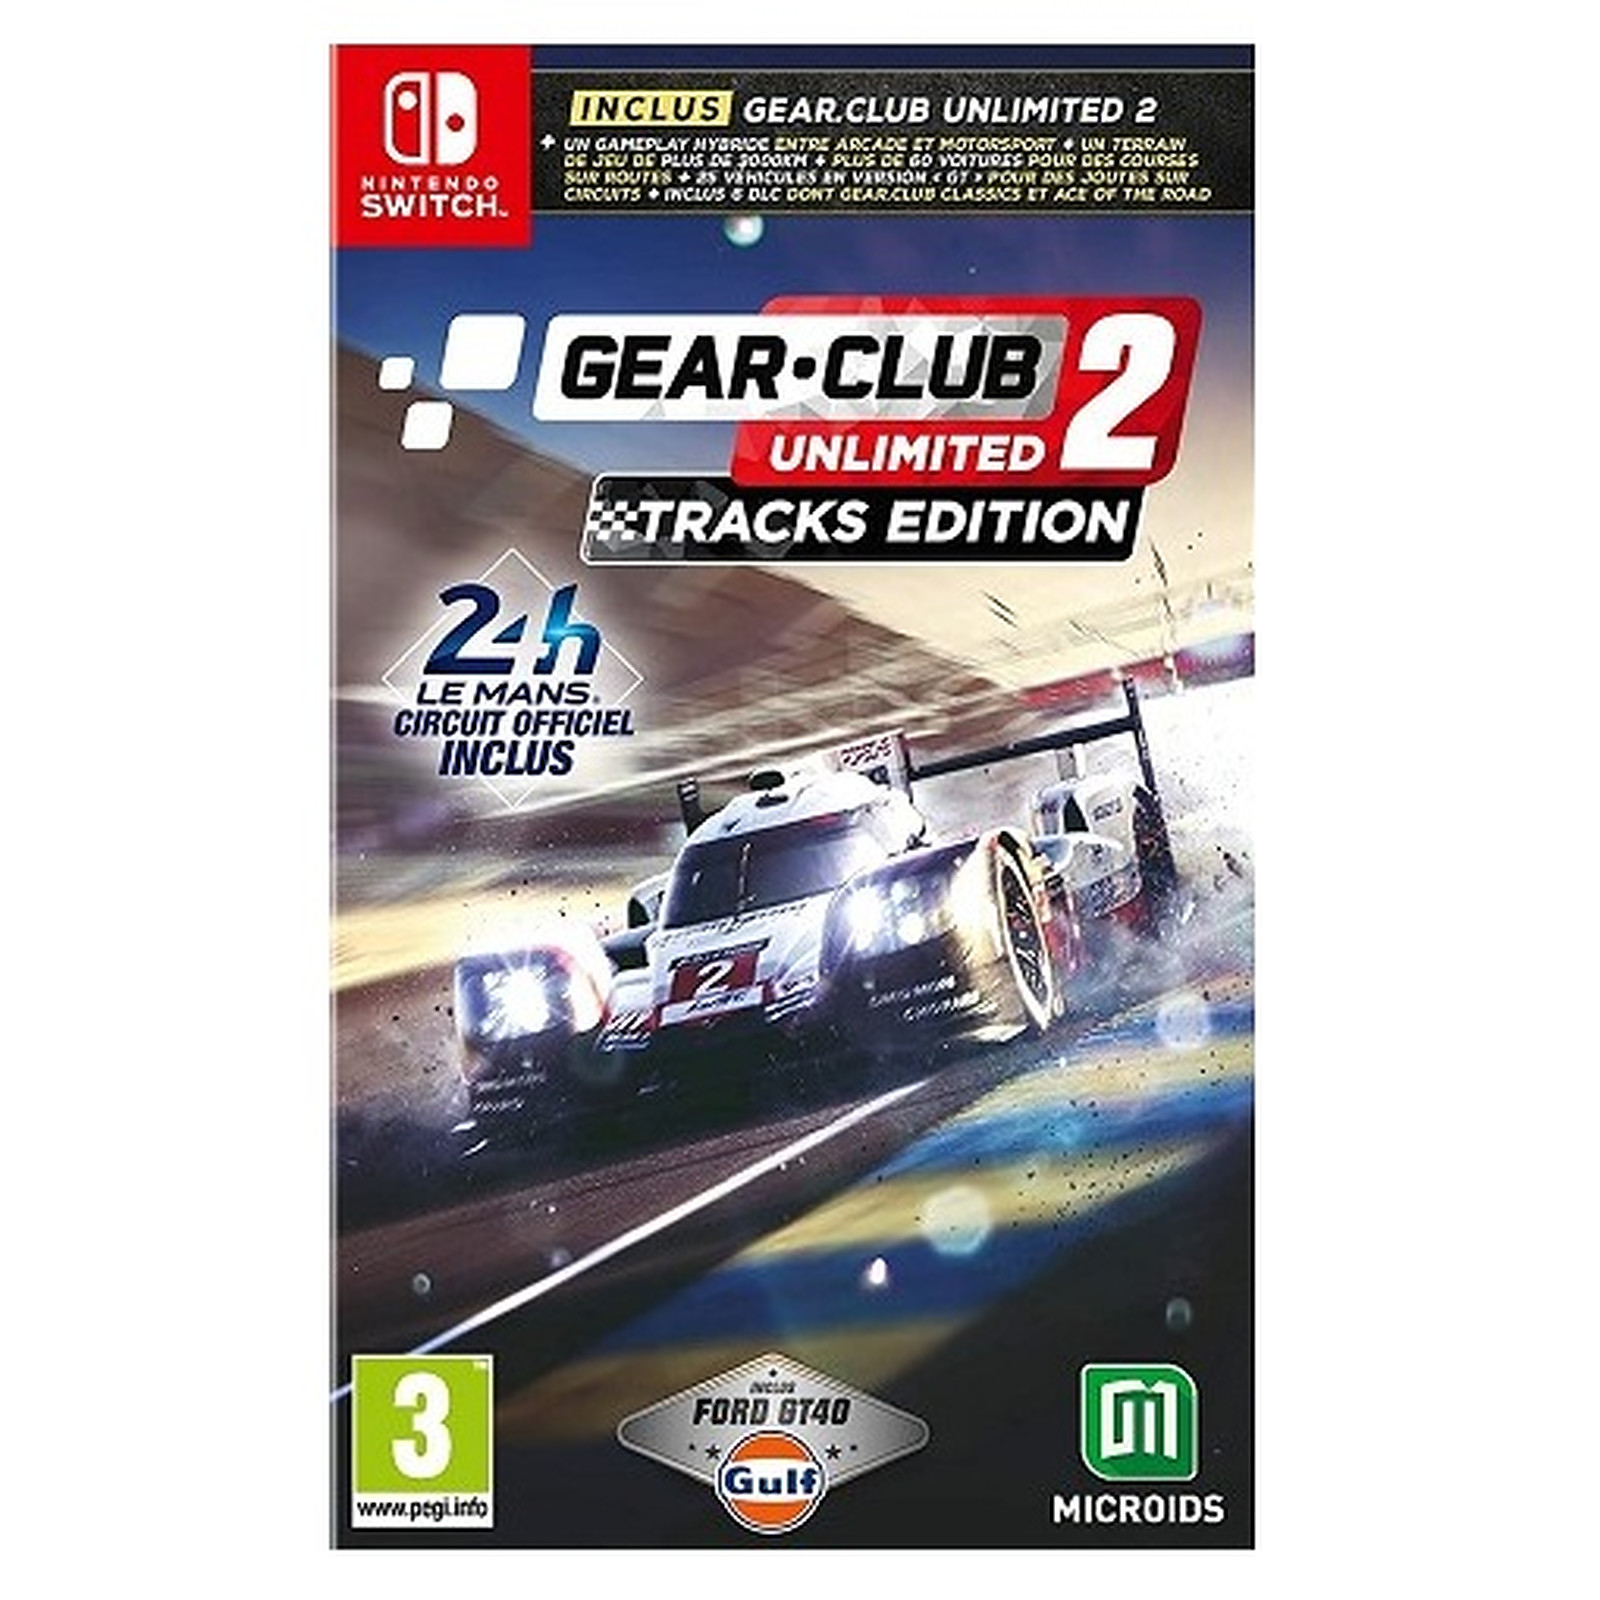 Gear.Club Unlimited 2 Tracks Edition (SWITCH) - Jeux Nintendo Switch Microa¯ds